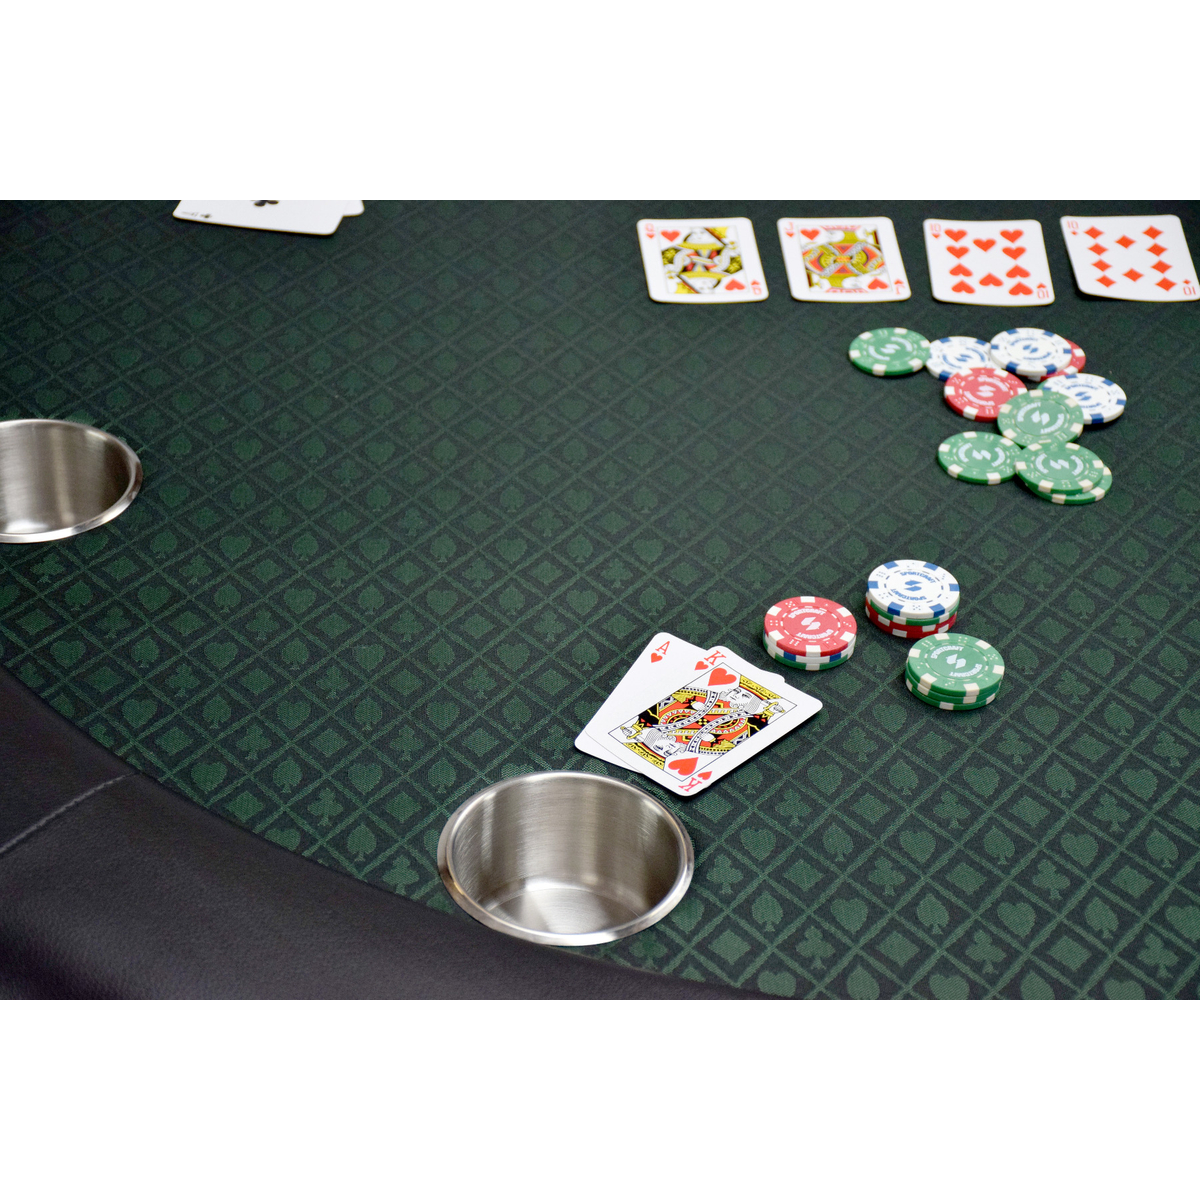 North Round Poker Table Texas 8 personnes Vert